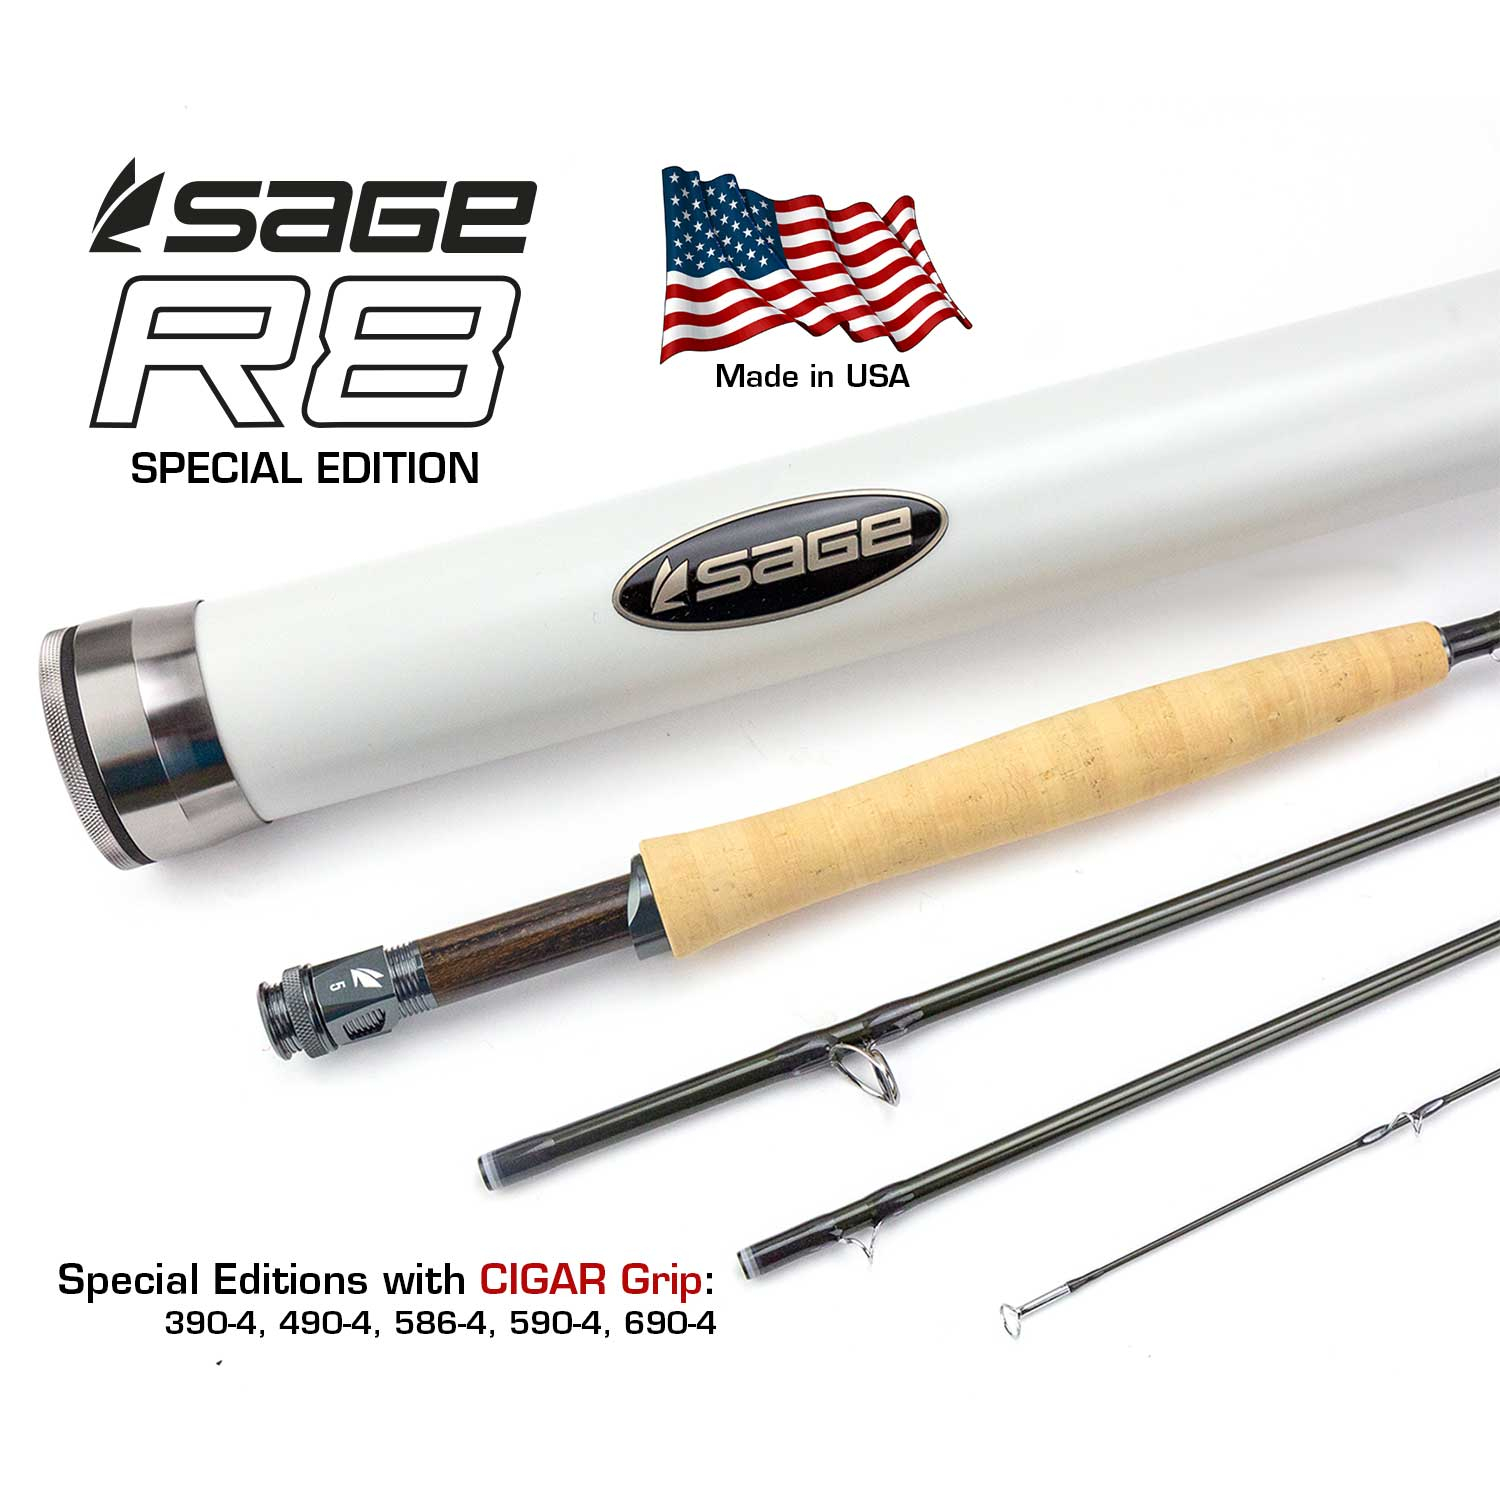 R8 Core Fly Rods - Cigar Grip